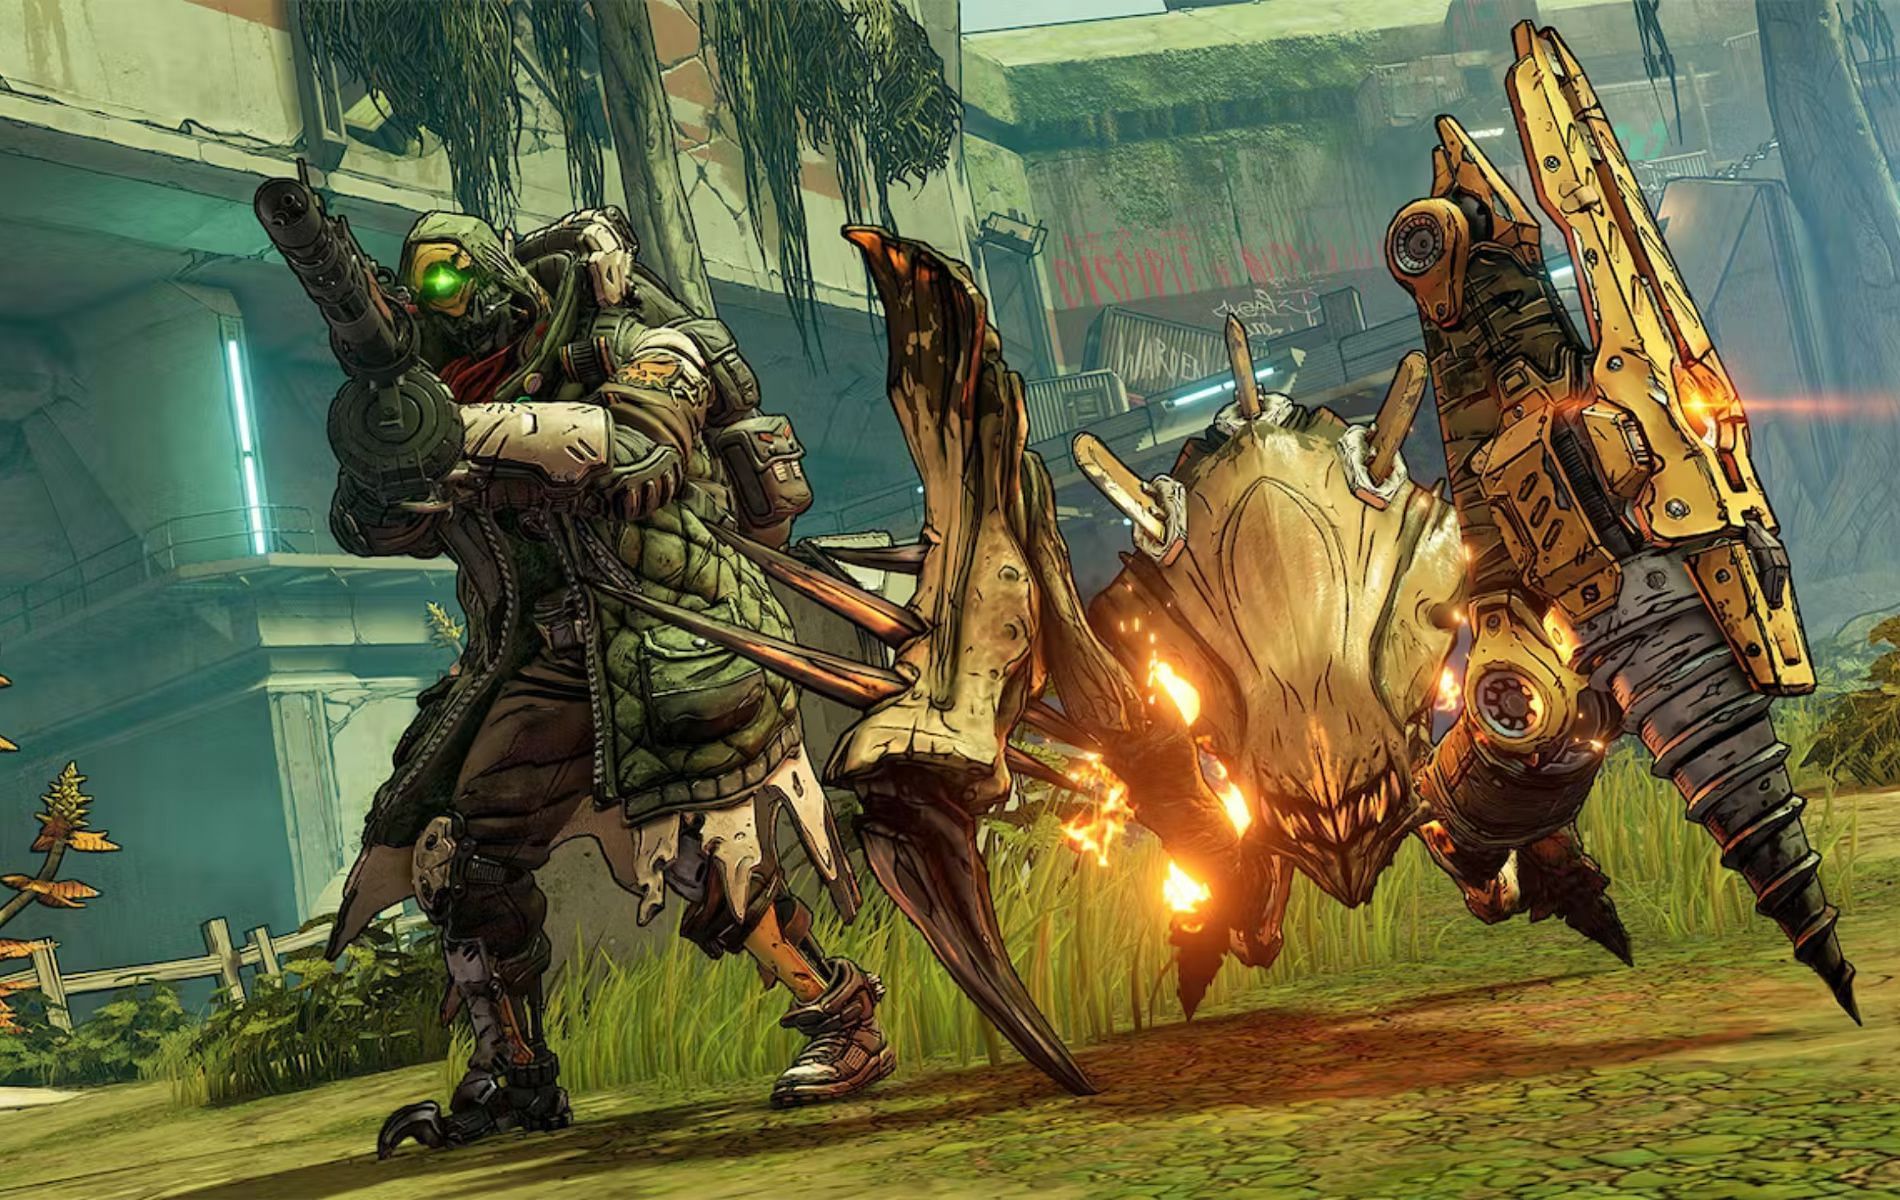 Official promotional screenshot for Borderlands 3 by Gearbox Software